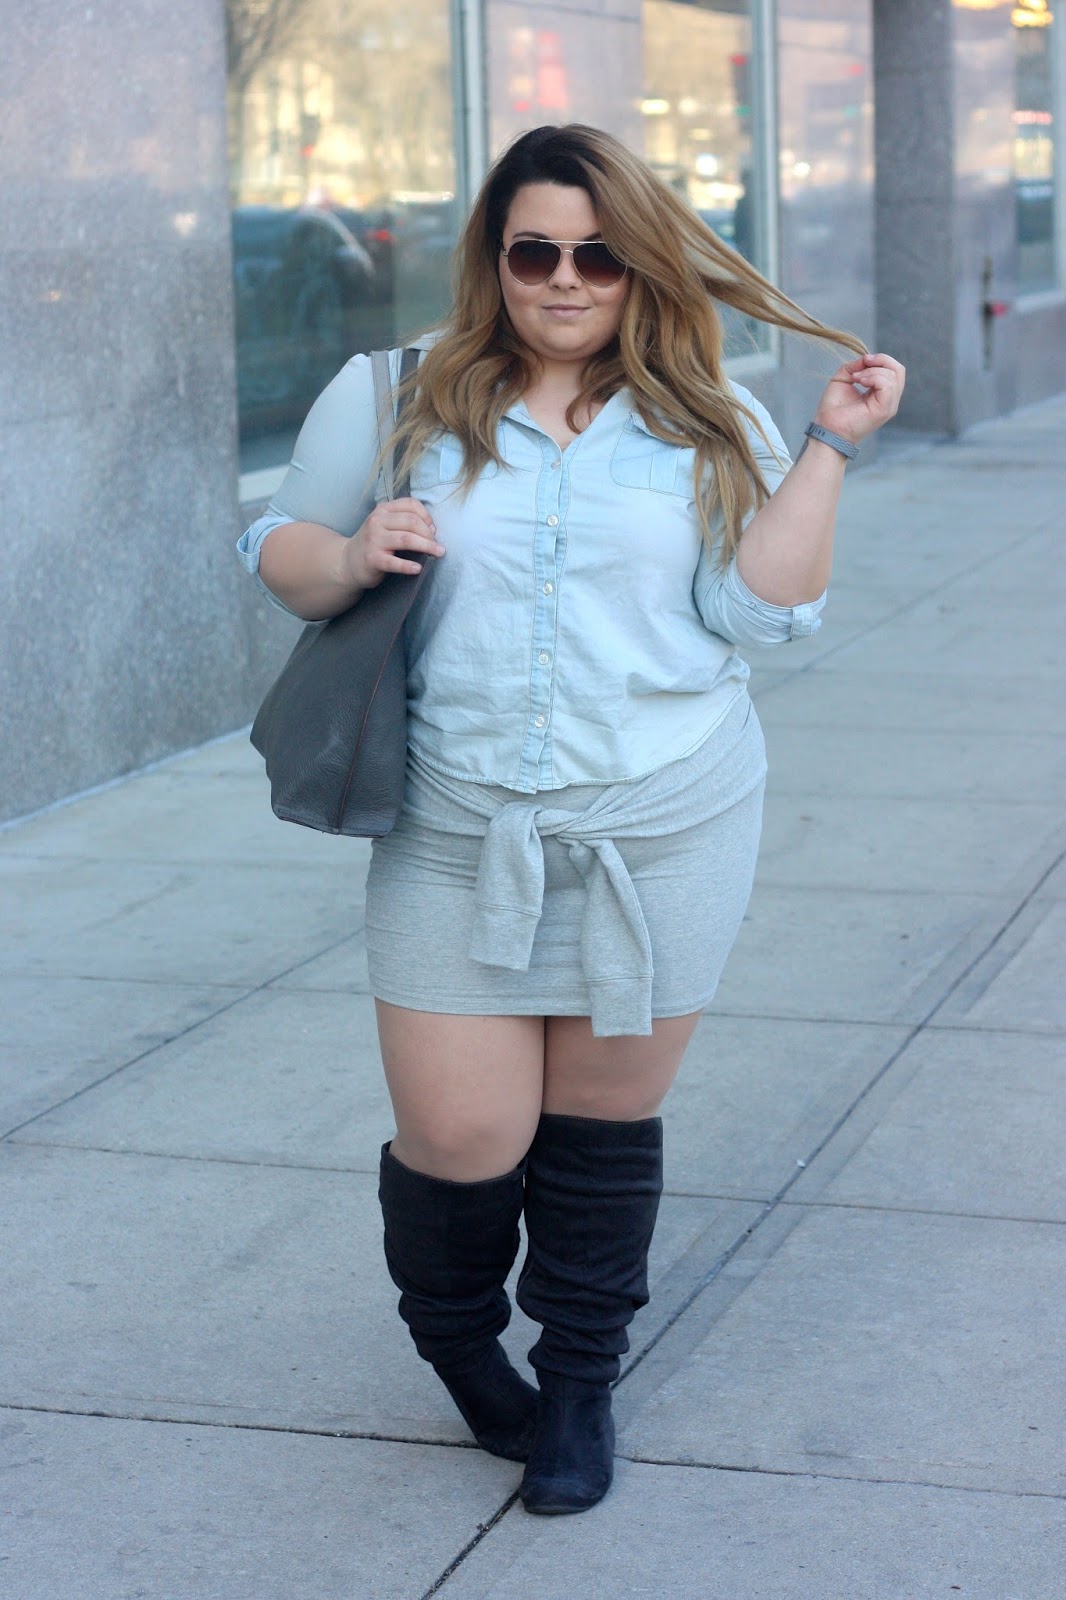 natalie in the city, natalie craig, chicago, ps fashion, plus size fashion blogger, how to wear a tie waist skirt, curvy, fatshion, charlotte russe plus, denim button up, knee high wide calf suede boots, bottle blonde